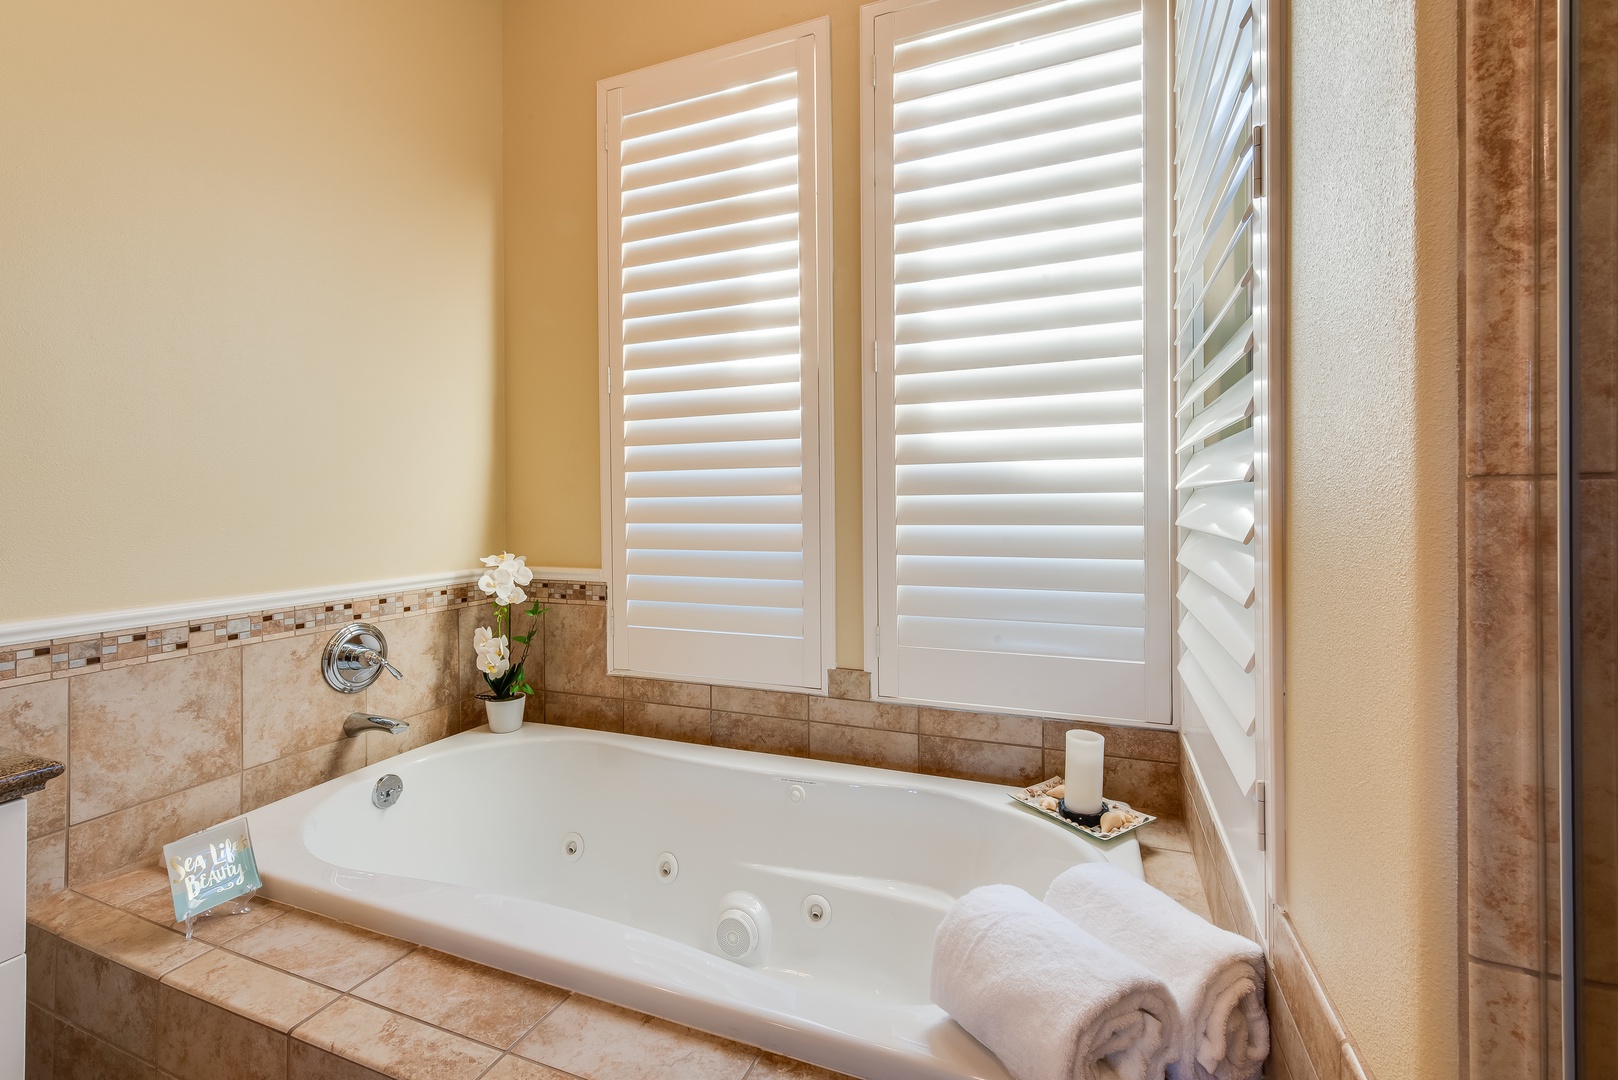 Kamuela Vacation Rentals, Kulalani 1701 at Mauna Lani - Relax in peace in the jacuzzi